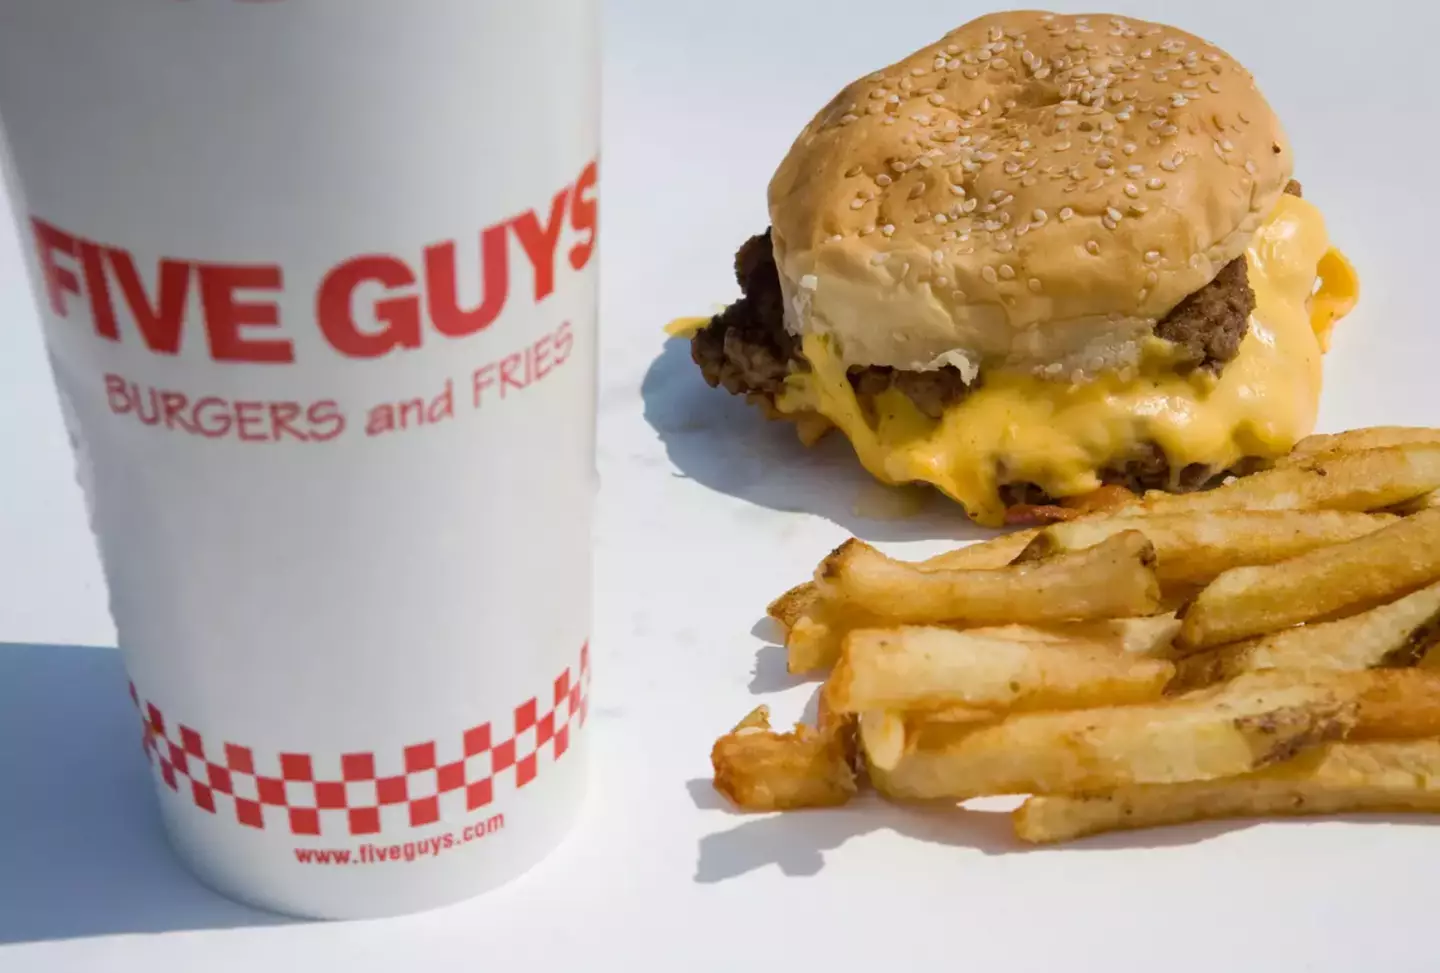 Five Guys allows you to make your burger the way you want, but that comes at a cost.